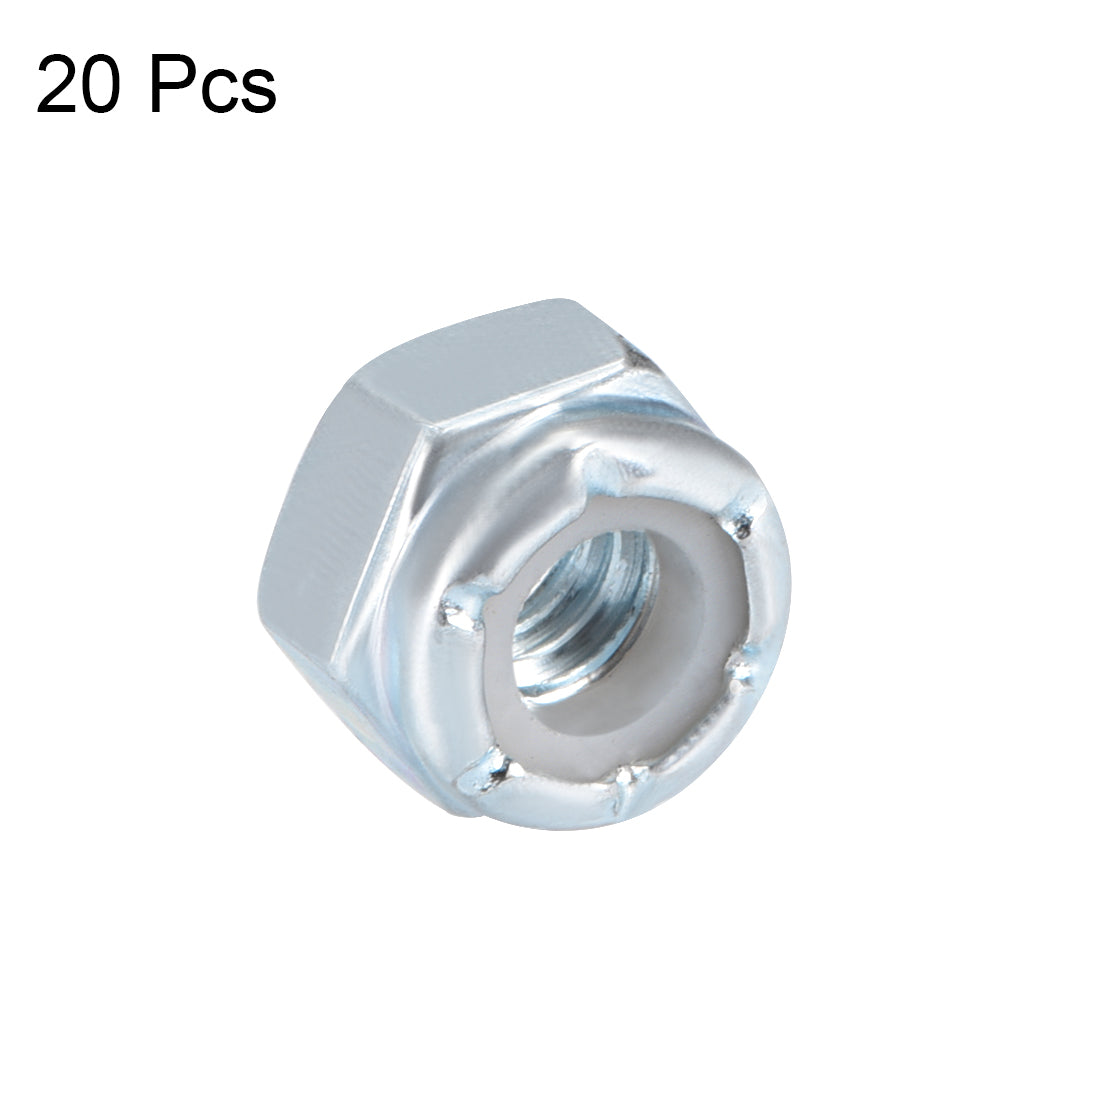 uxcell Uxcell 1/4"-20 Nylon Insert Hex Lock Nuts, Carbon Steel White Zinc Plated, 20 Pcs